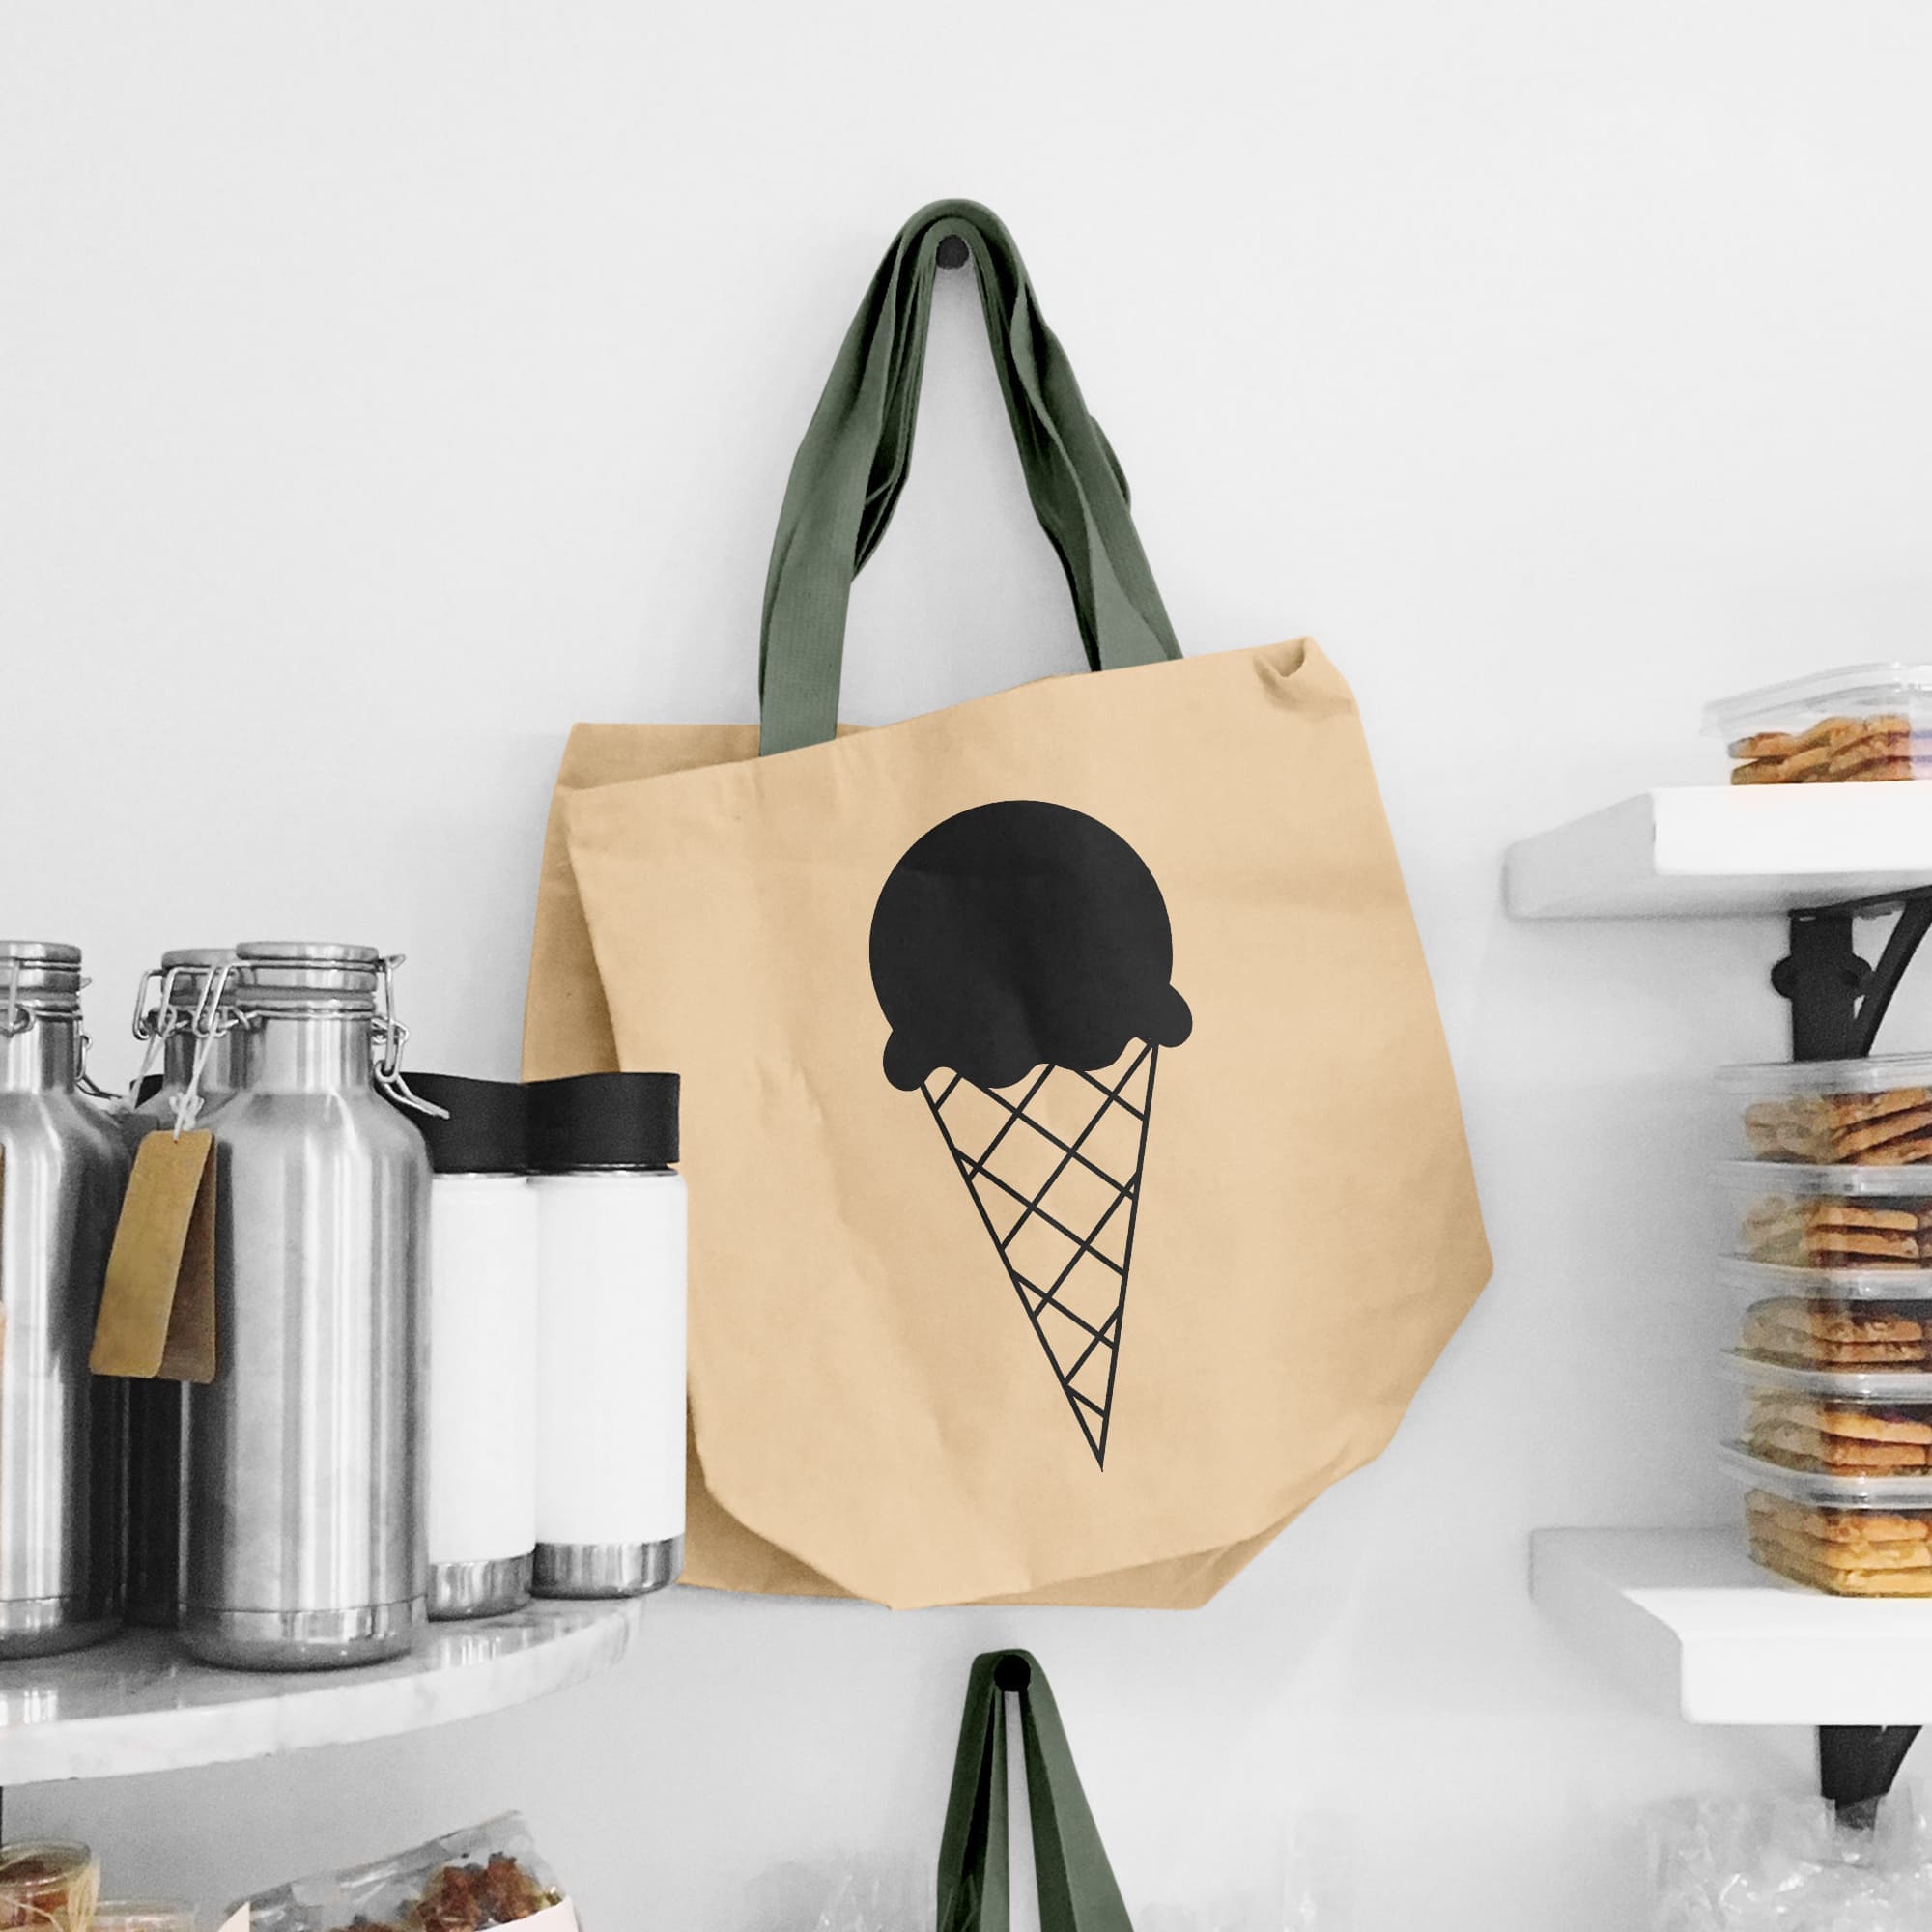 Chocolate ice cream painted on a grocery bag.